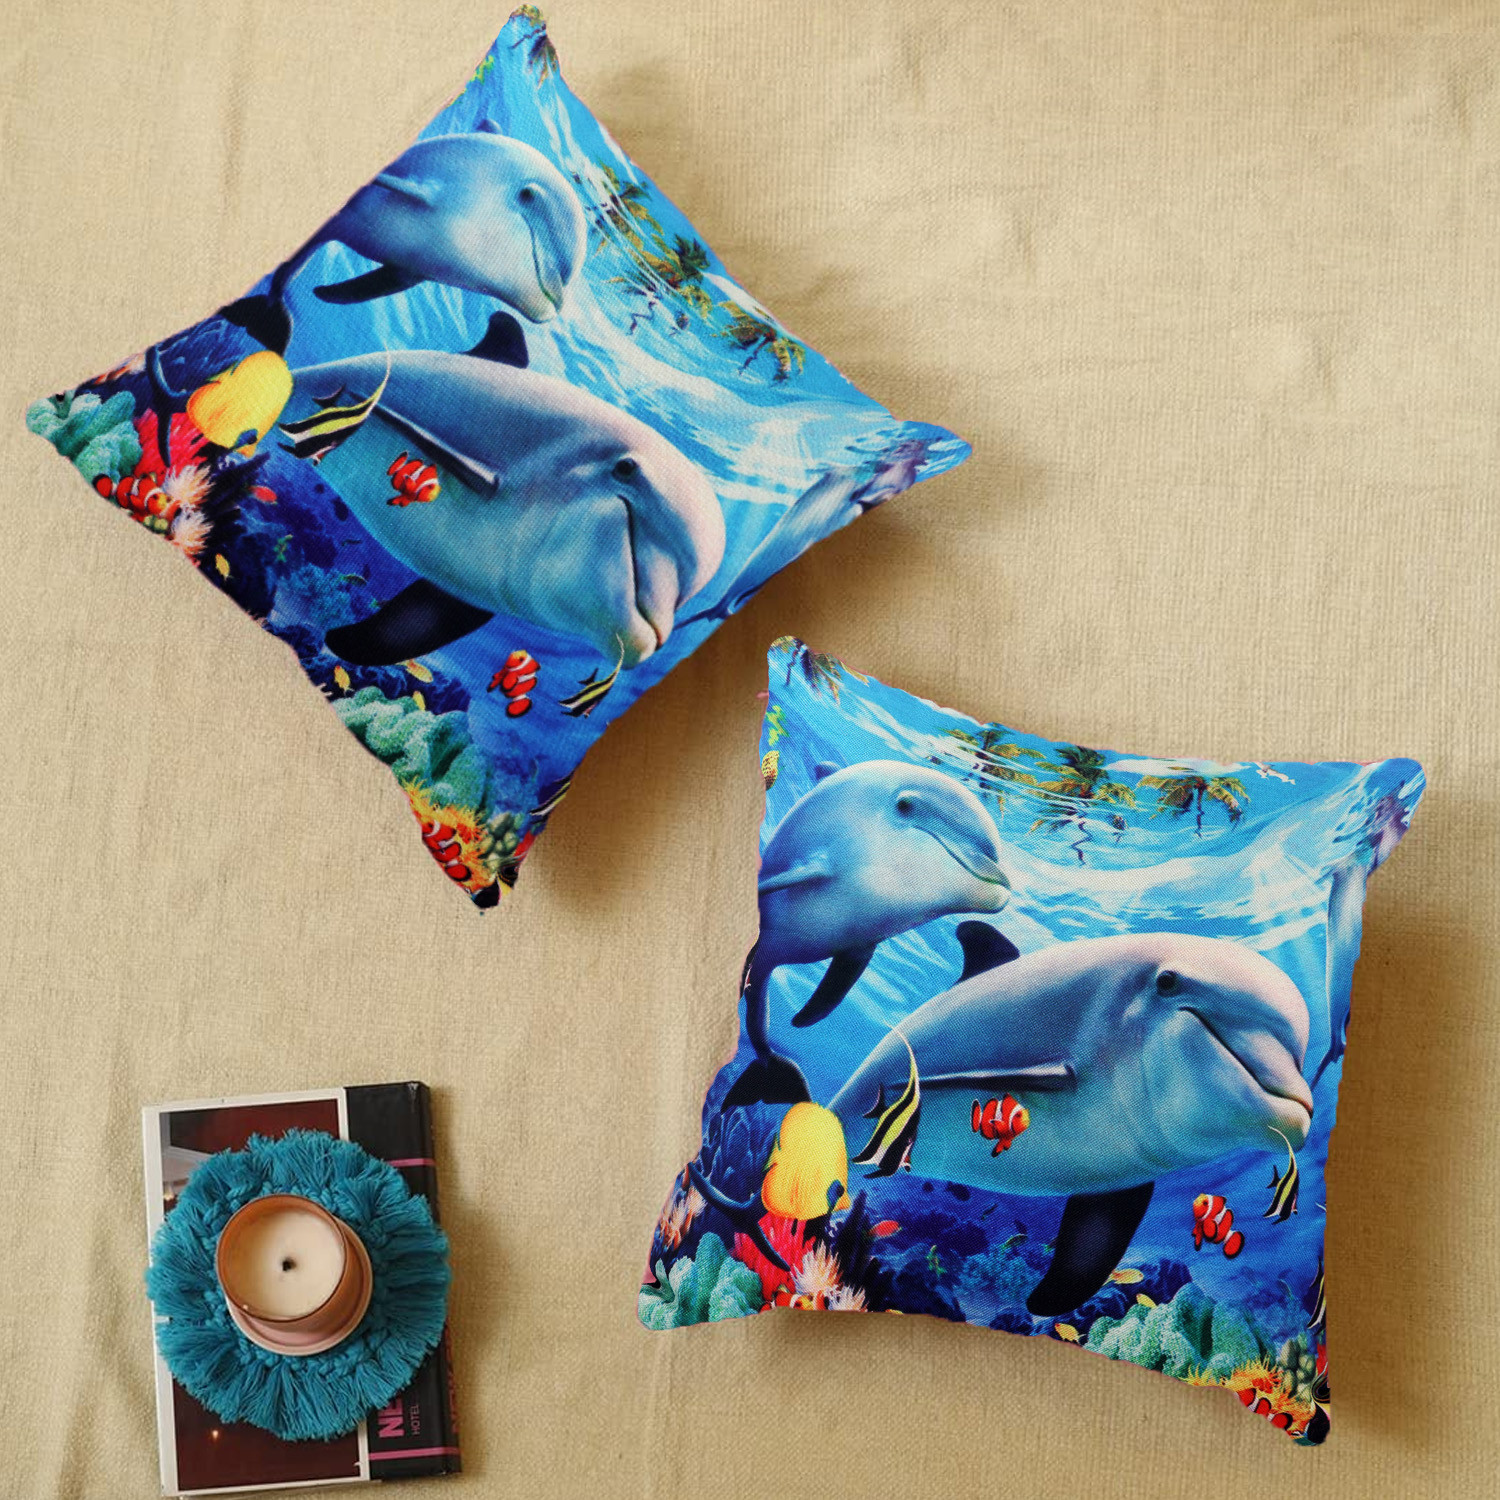 Kuber Industries Cushion Cover|Ractangle Cushion Covers|Sofa Cushion Covers|Cushion Covers 16 inch x 16 inch|Cushion Cover Set of 5 (Blue)